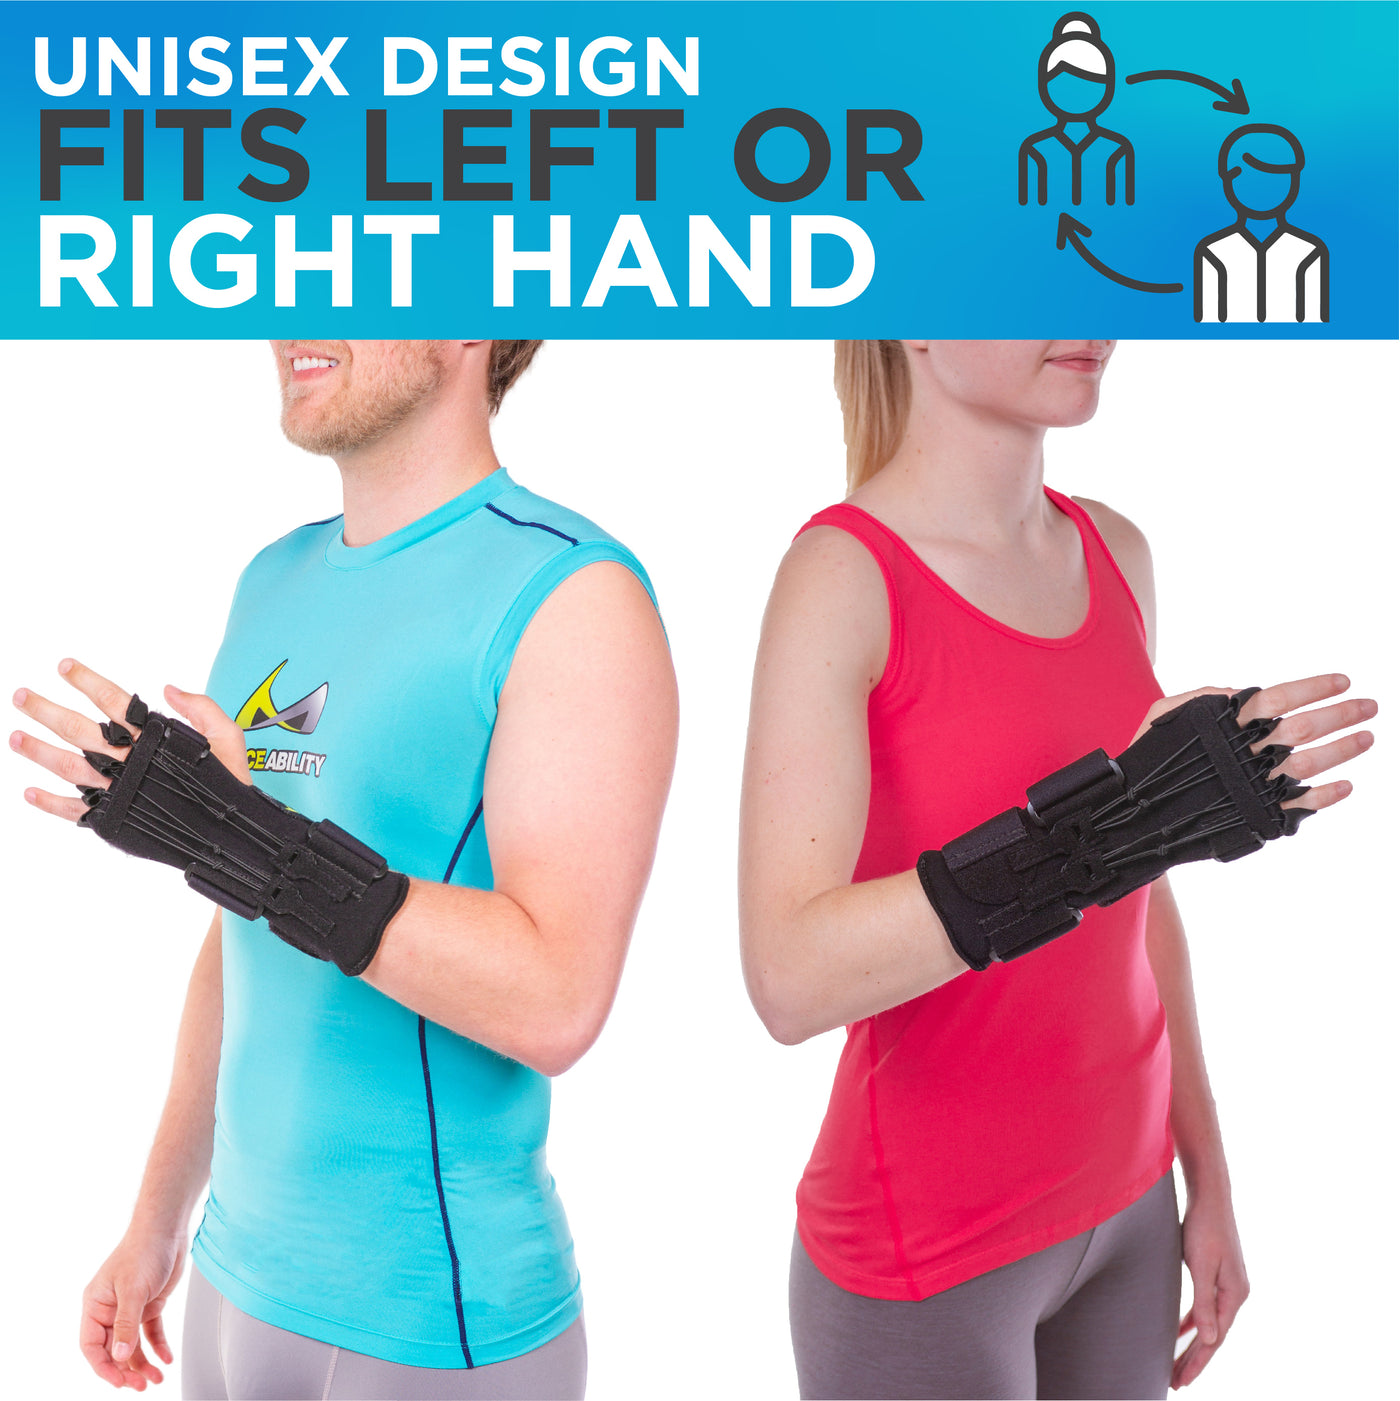 Our Saturday night palsy splint fits men and women on left or right hand